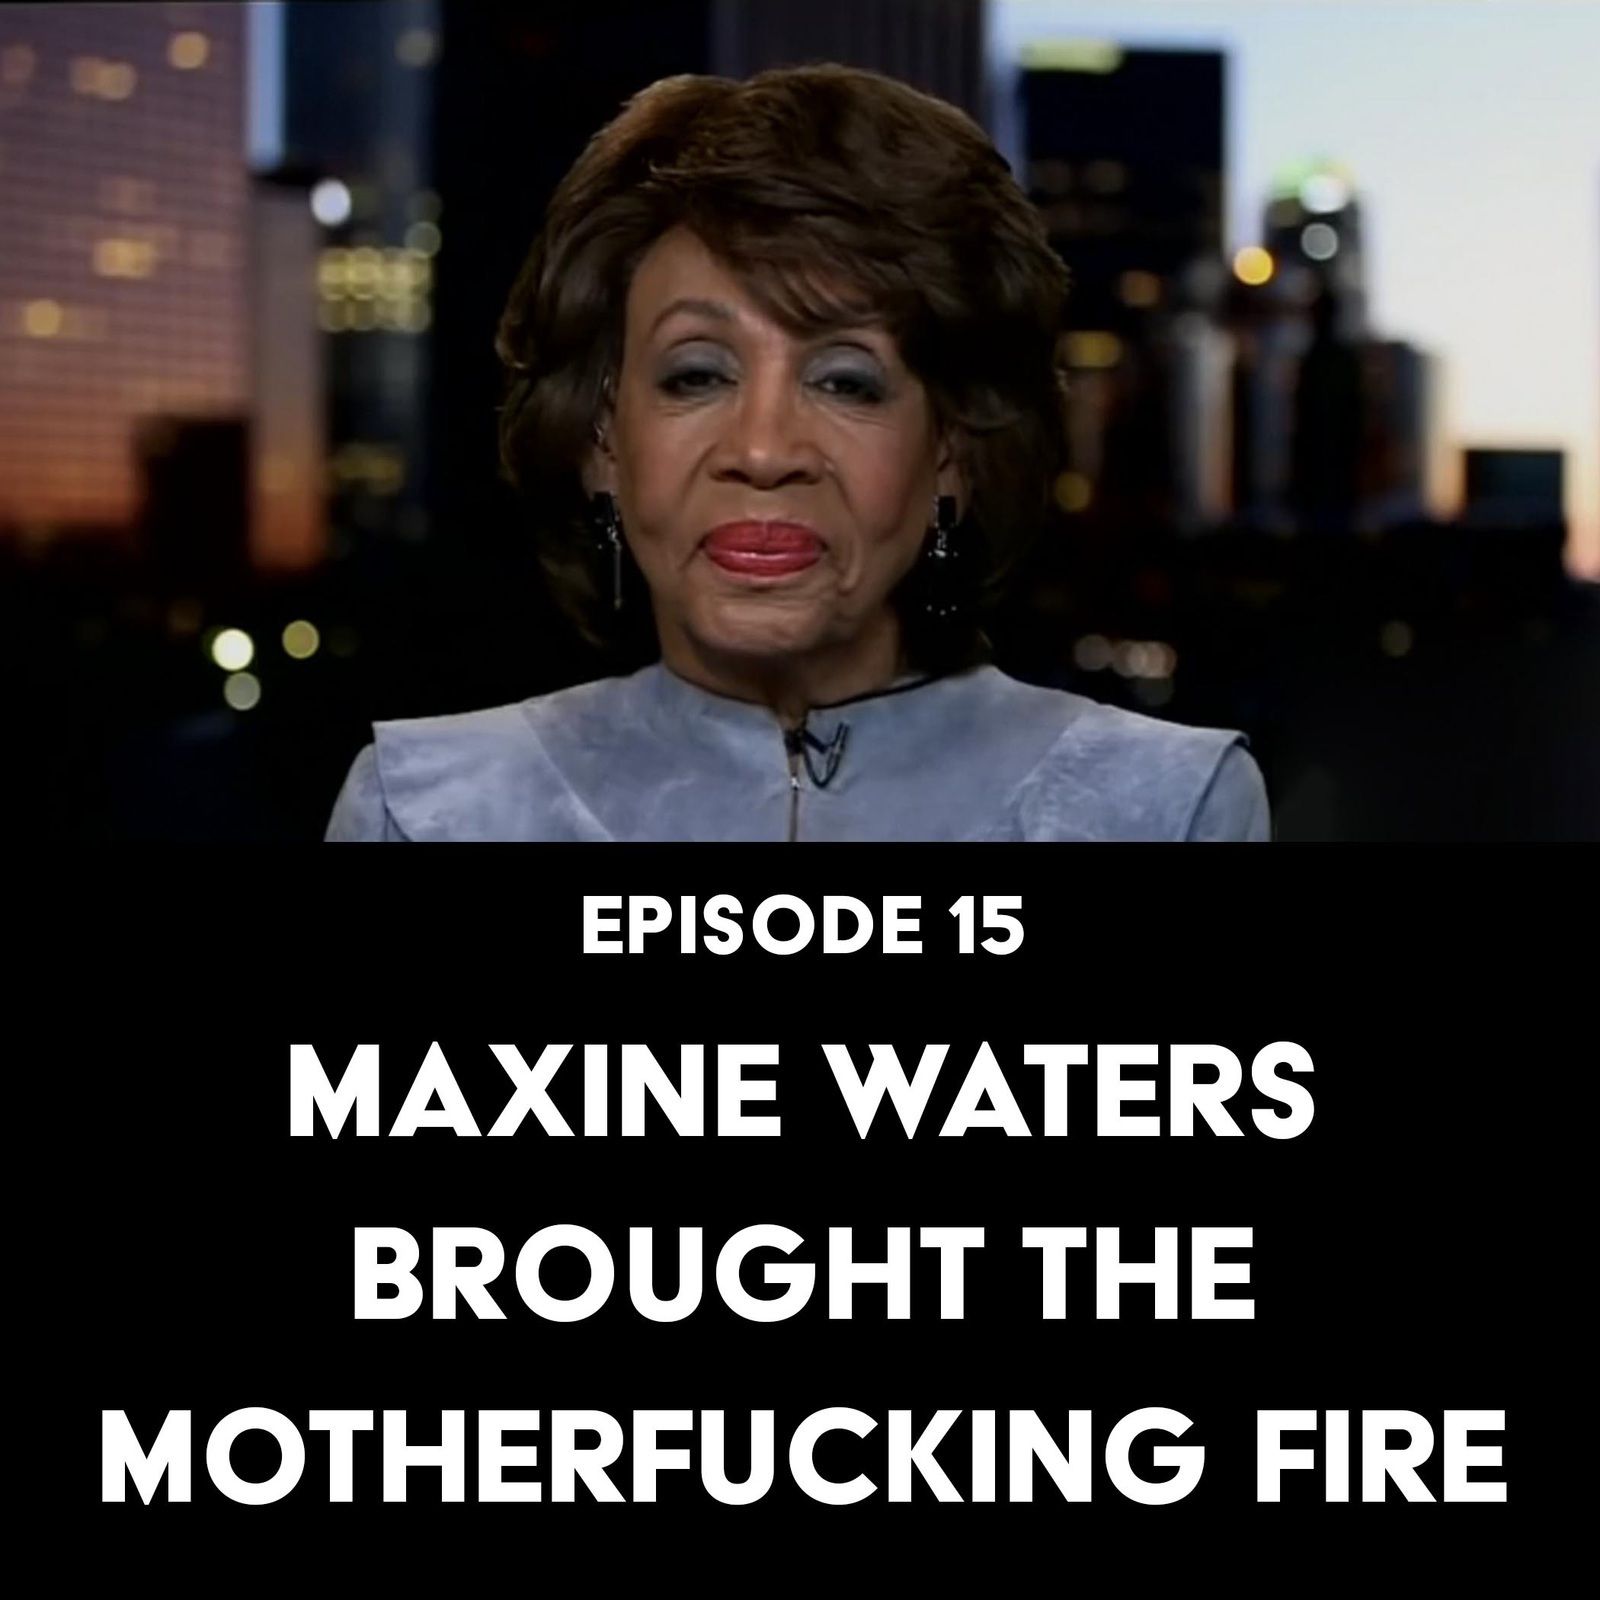 S1 Ep15: Maxine Waters Brought the Motherfucking Fire